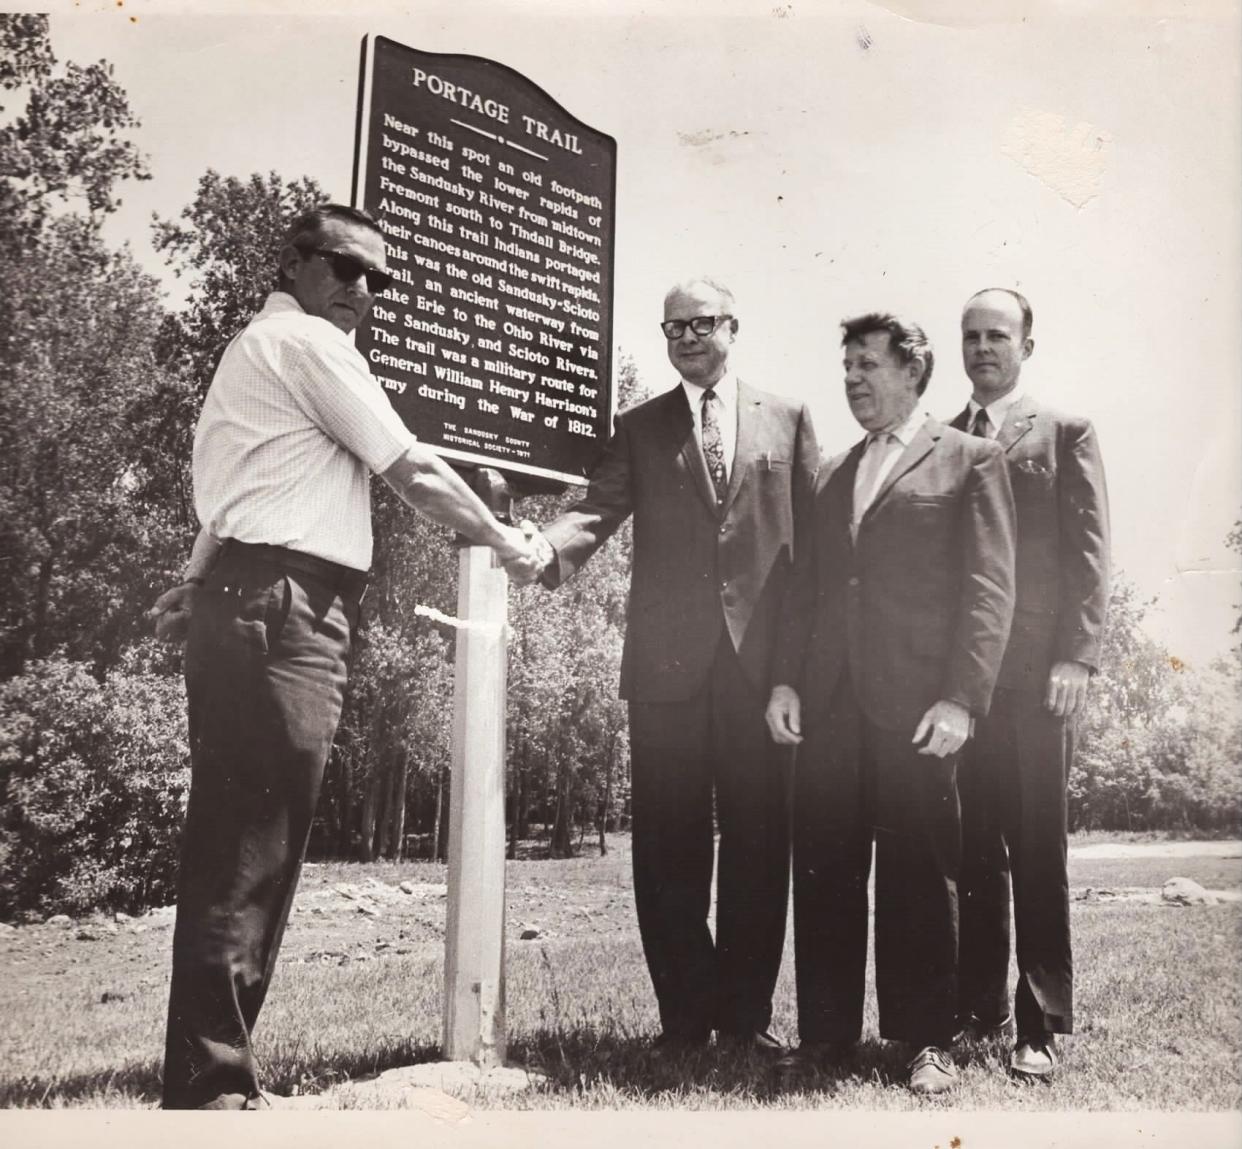 This photo shows the original portage marker dedication in 1971.